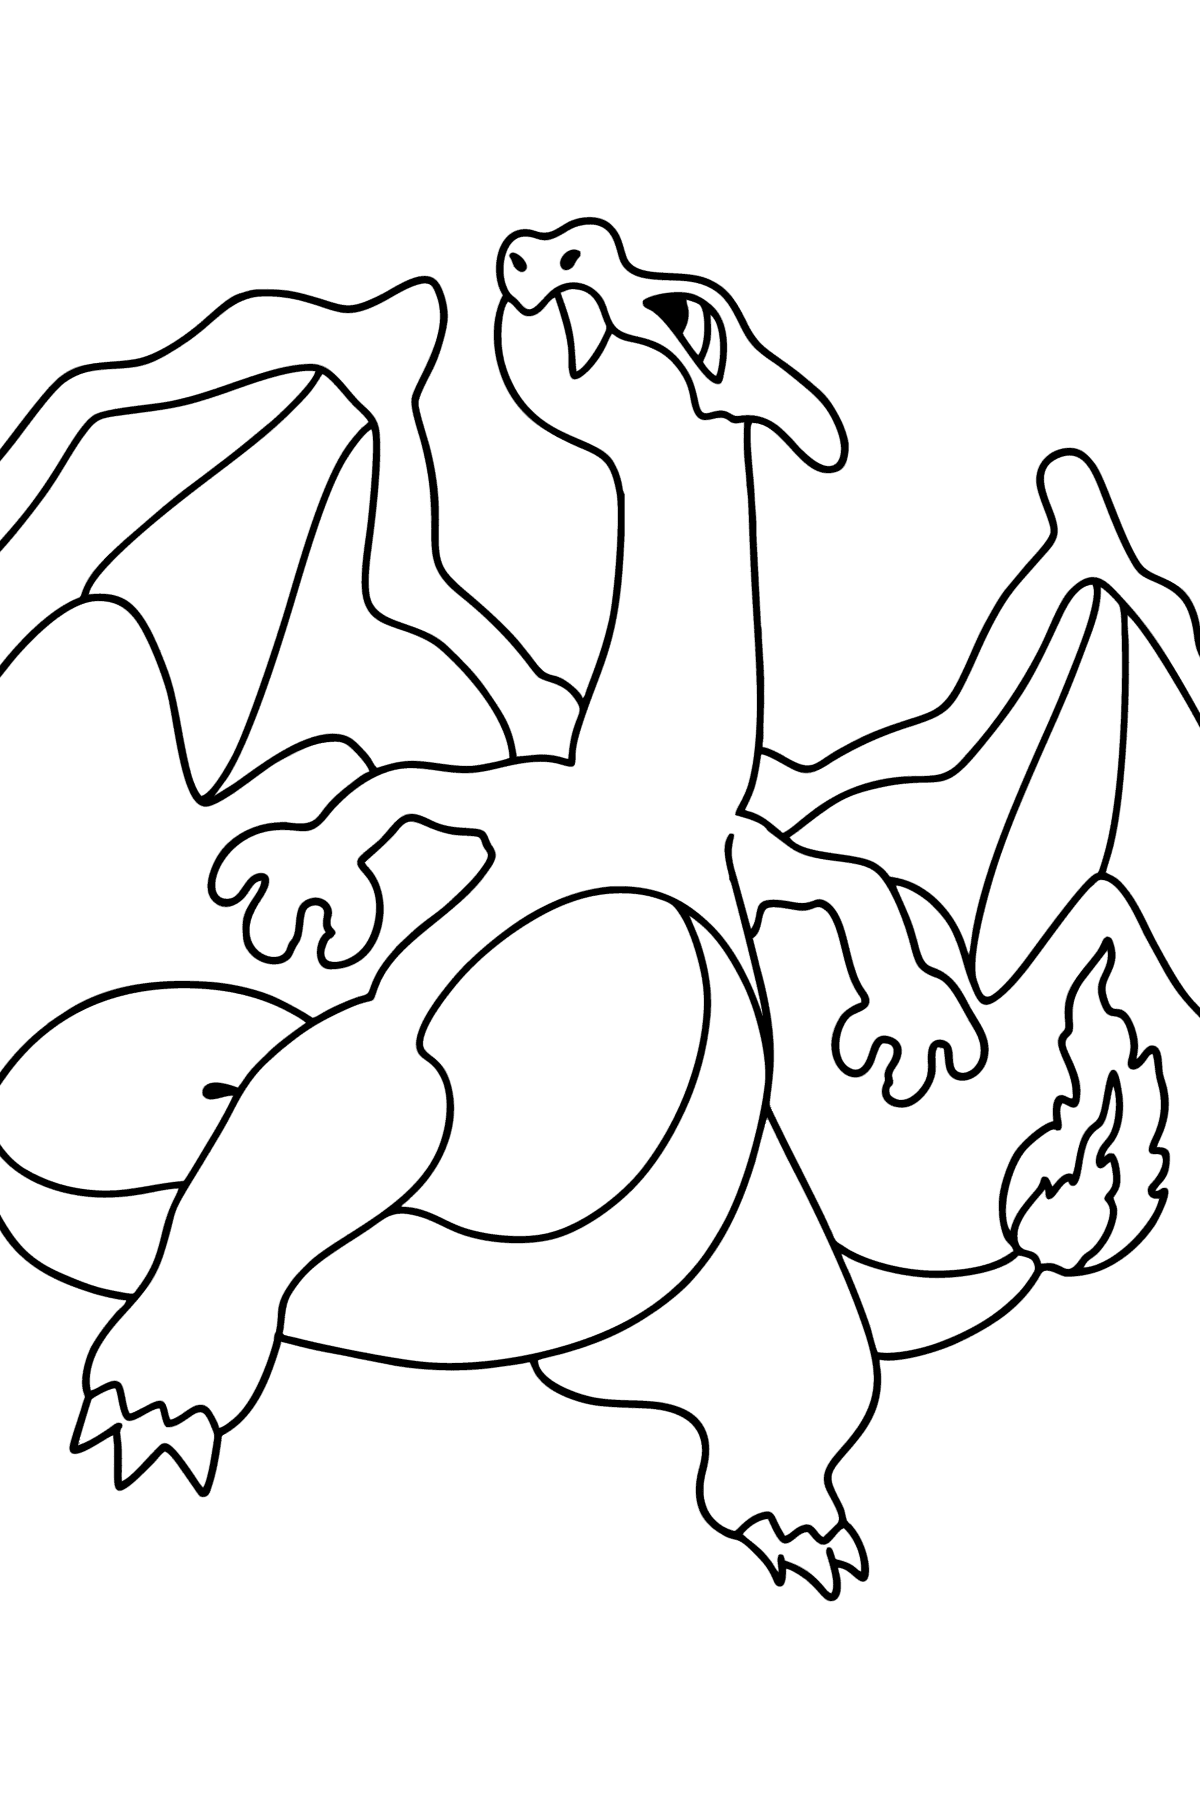 Pokémon Go Charizard coloring page - Coloring Pages for Kids